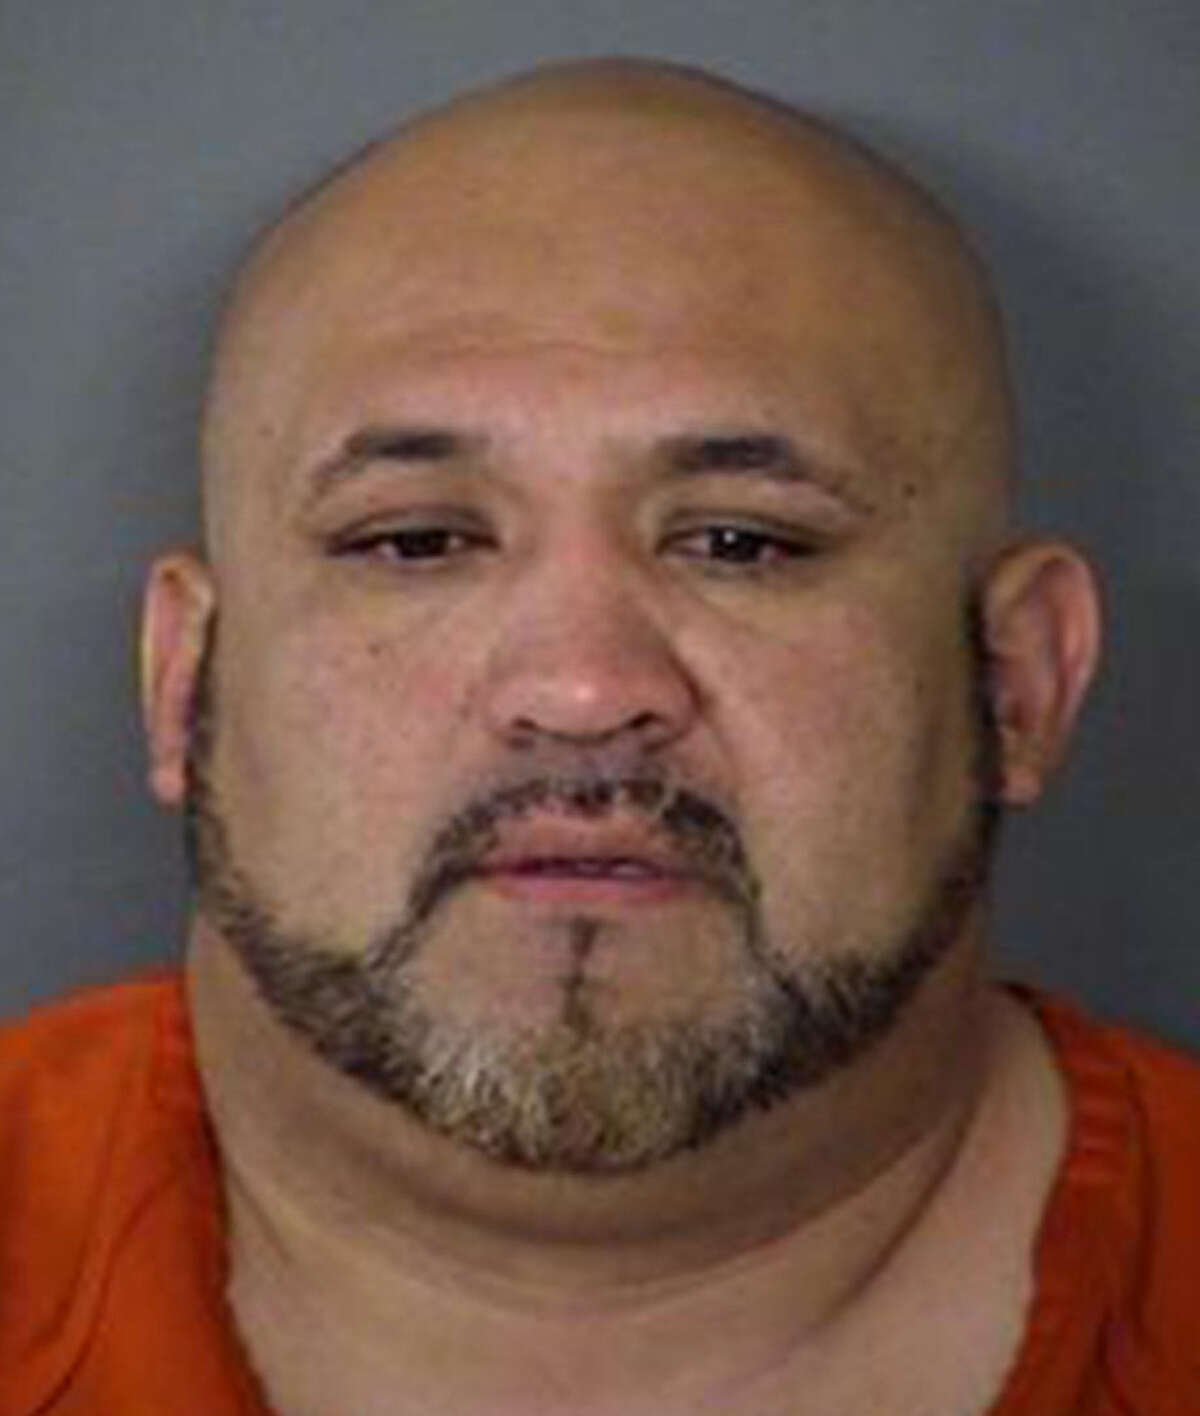 Ivan Cruz Aguilar, 35, was charged with murder three weeks after the body was found.